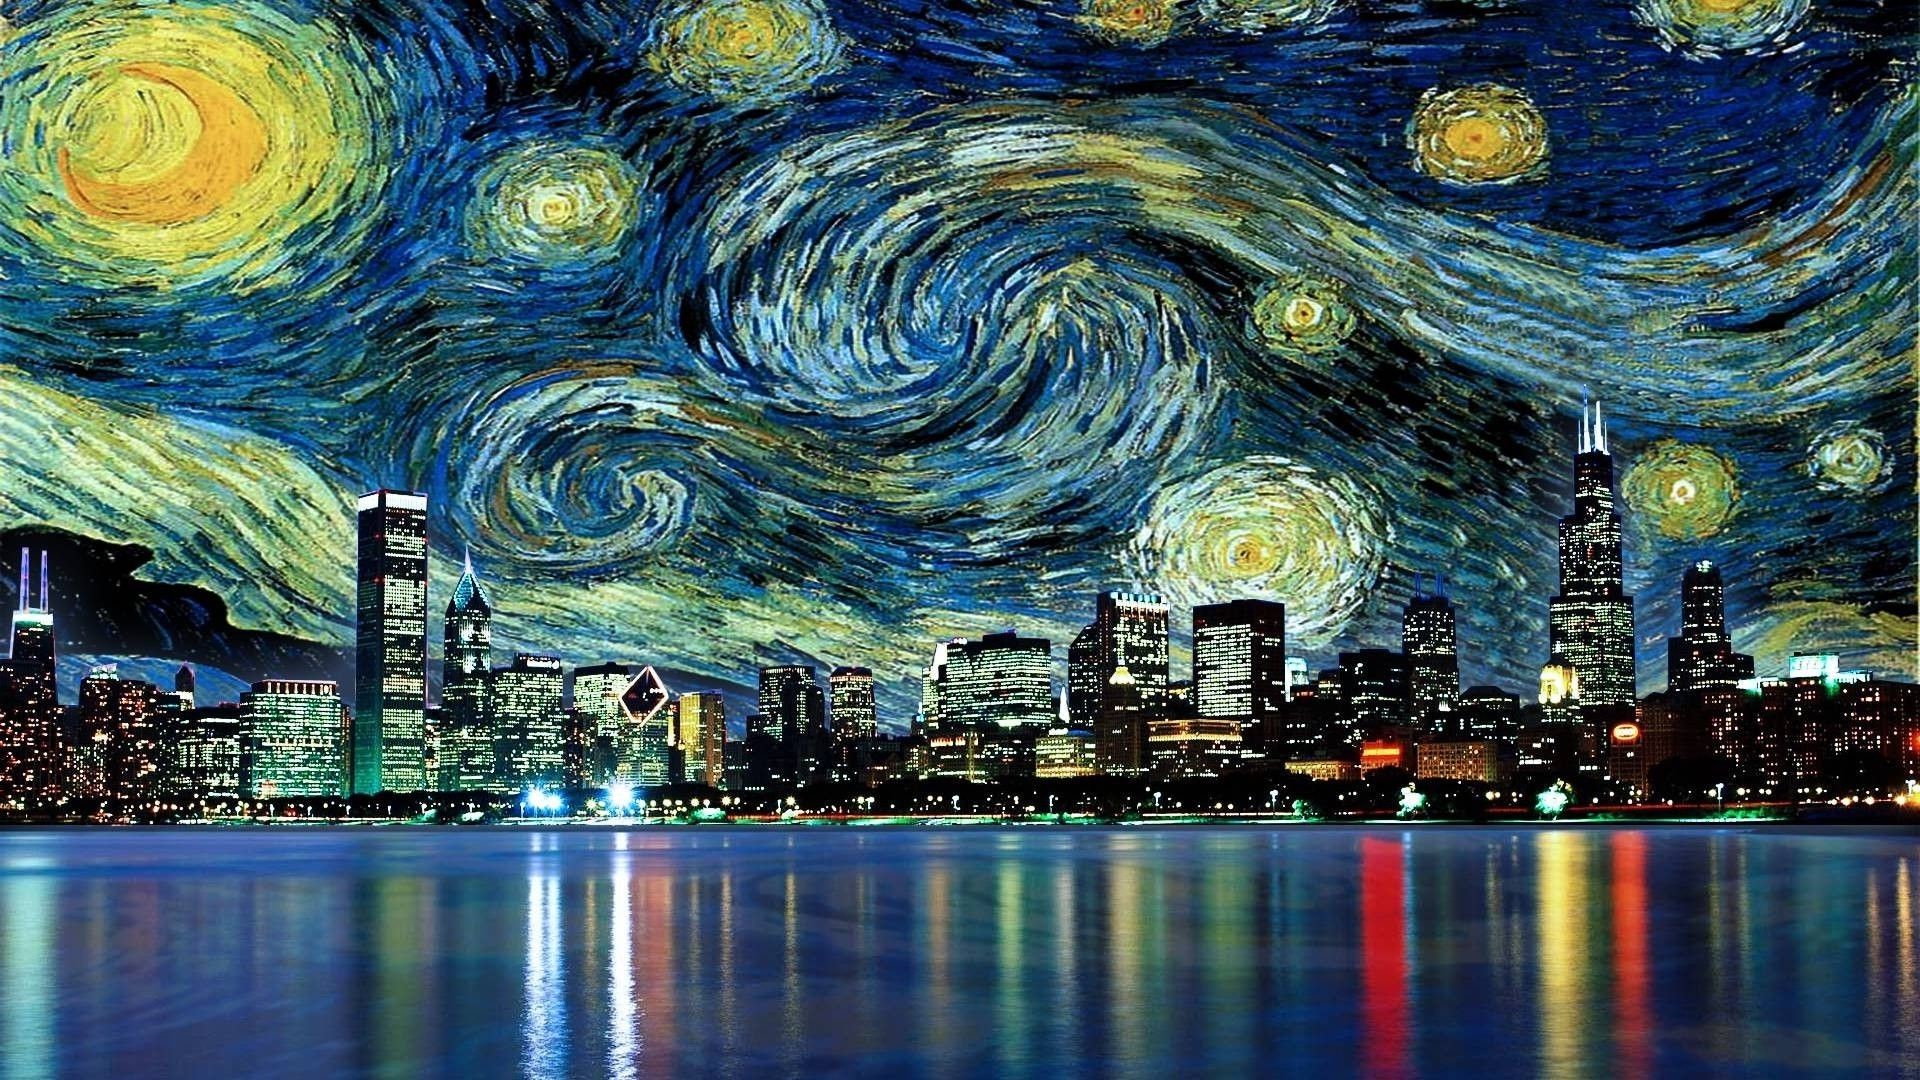 1920x1080, Vincent Van Gogh The Starry Night Free Wallpapers - Starry Night City Painting - HD Wallpaper 